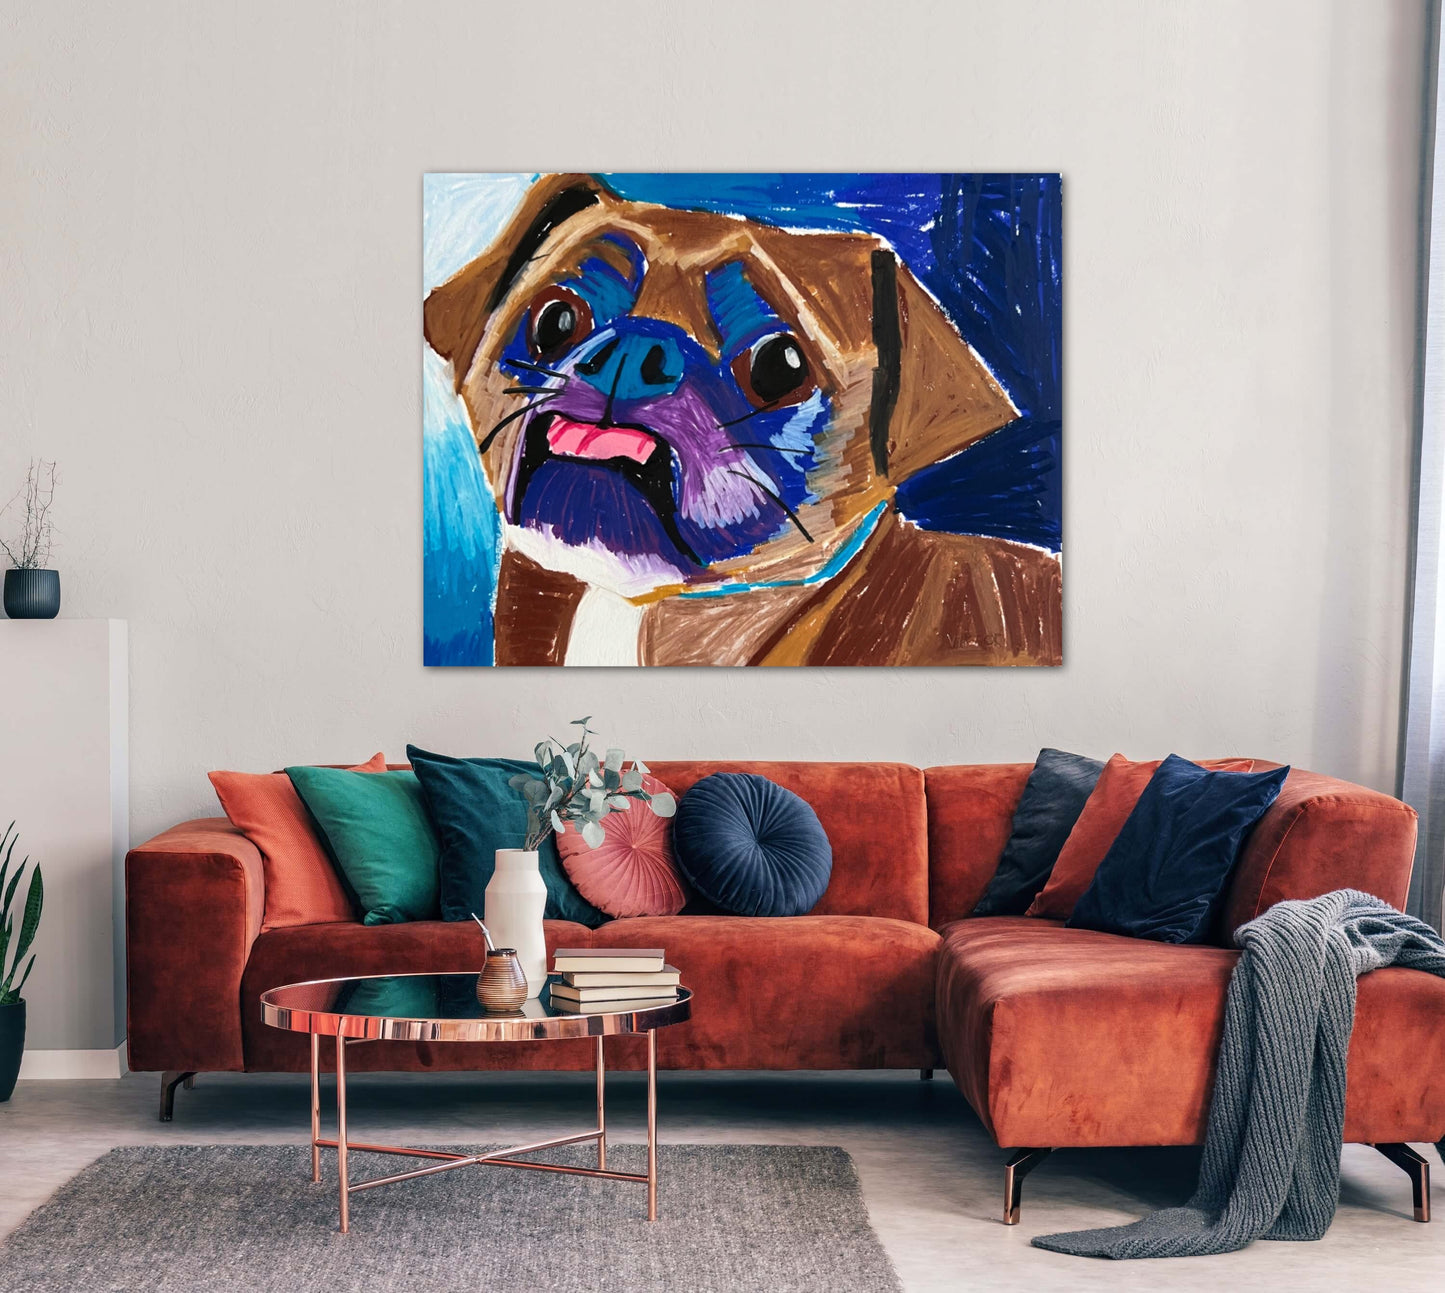 The Blue Puppy - Print, Poster or Stretched Canvas Print in more sizes